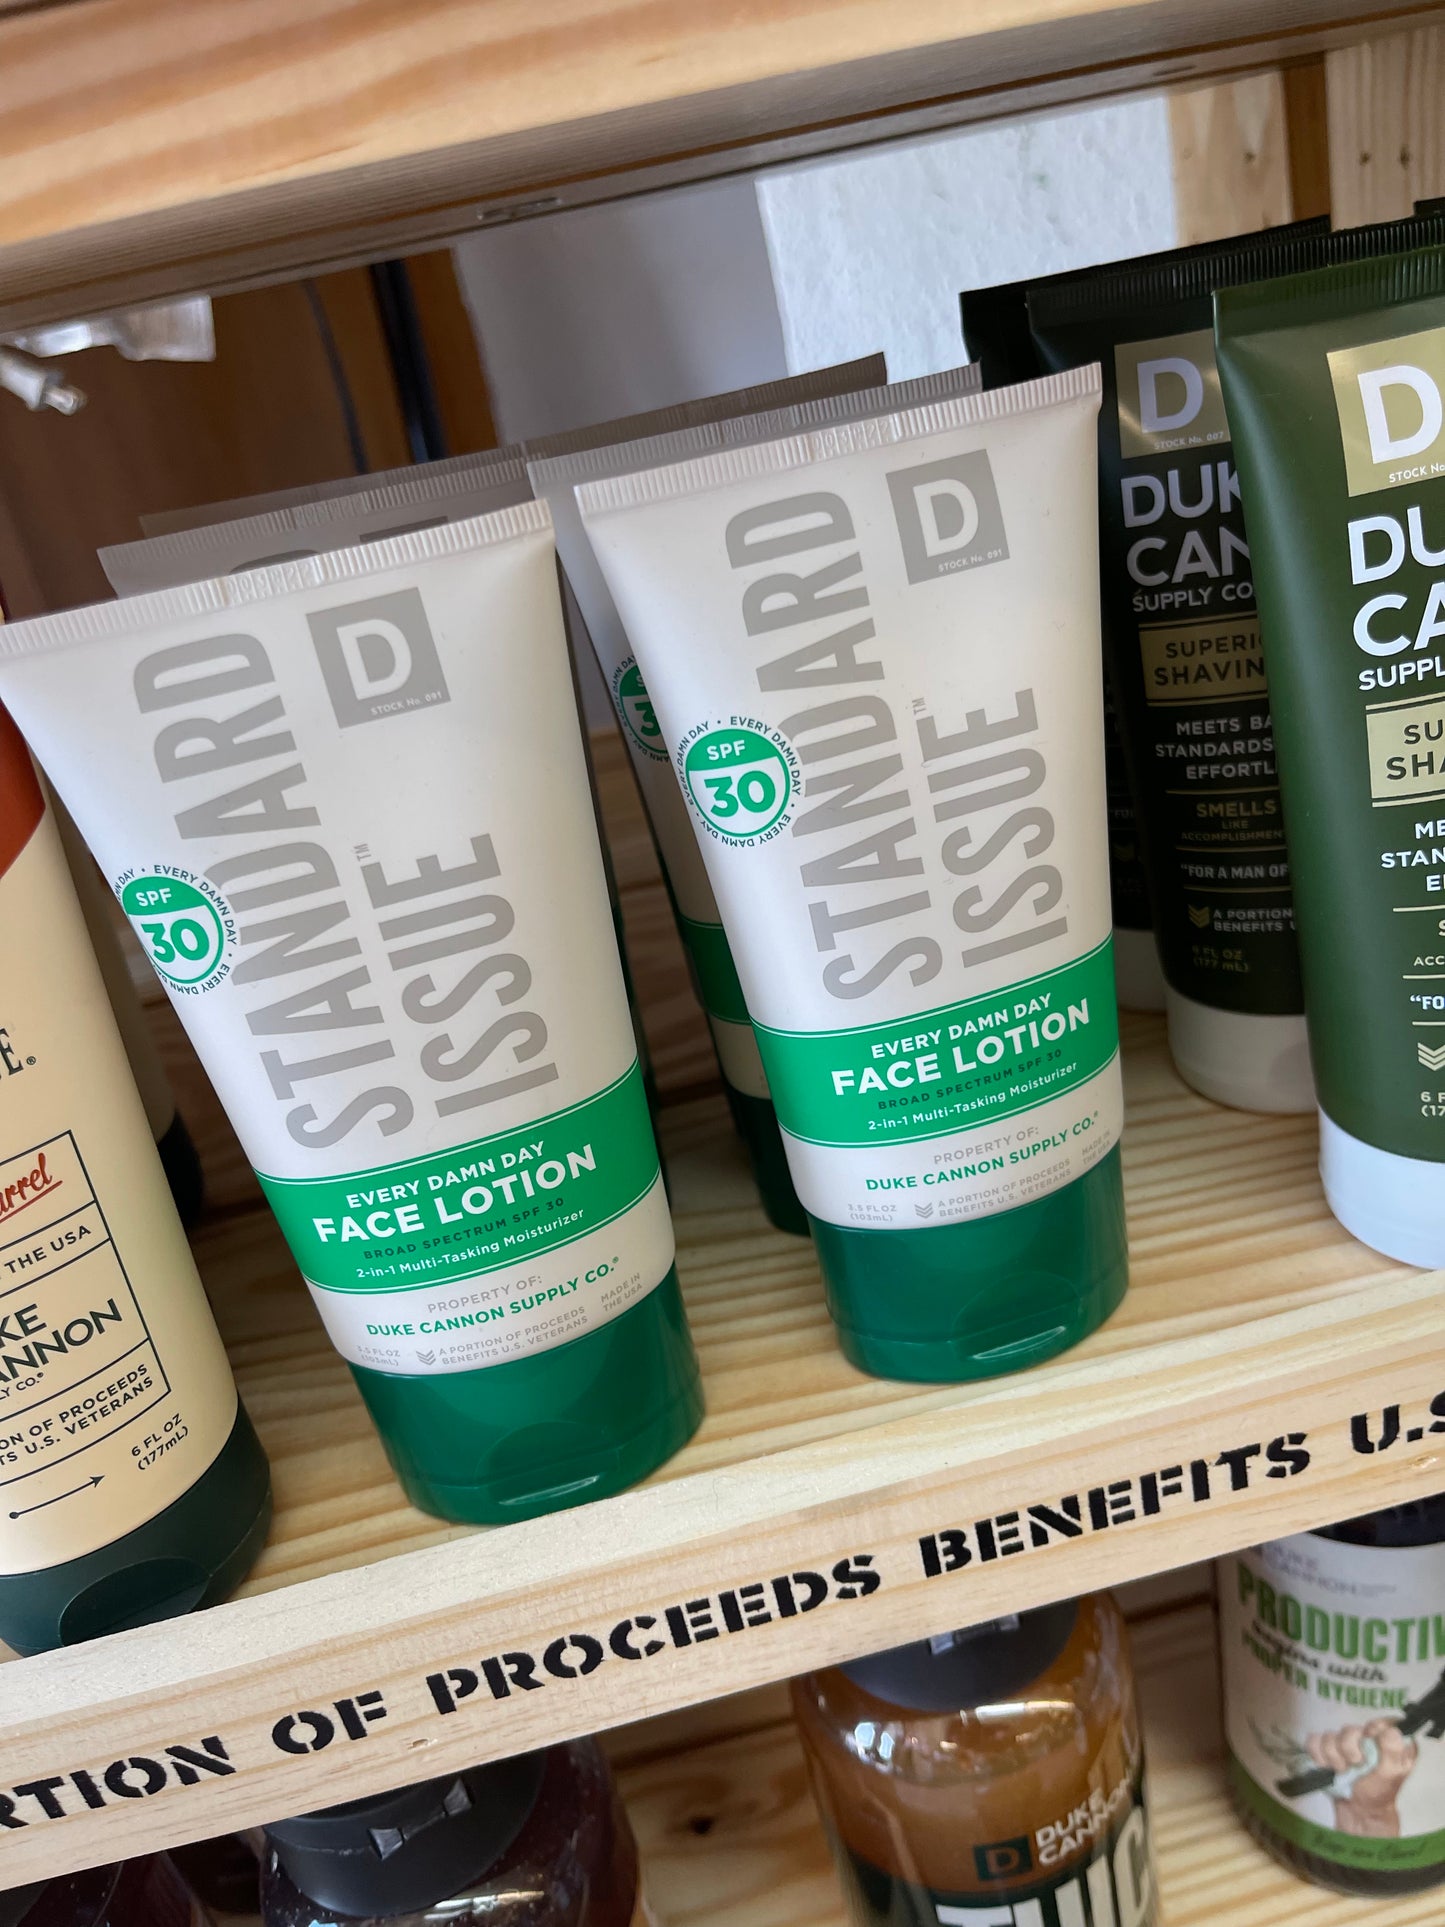 DC 2 in 1 SPF Face Lotion